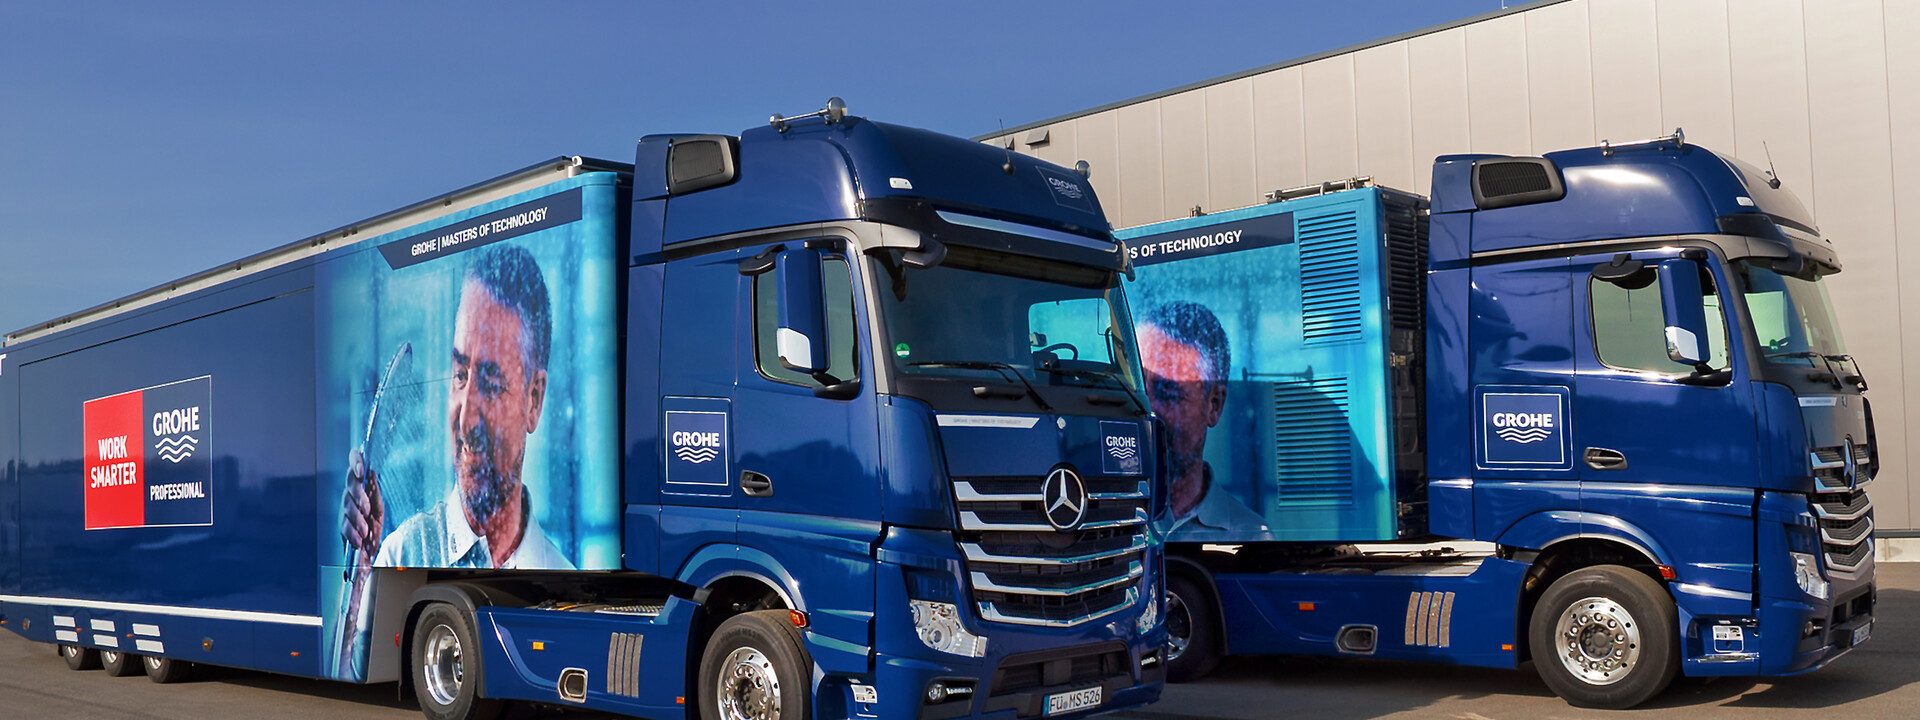 showtruck-grohe-actros-giant-1.jpg